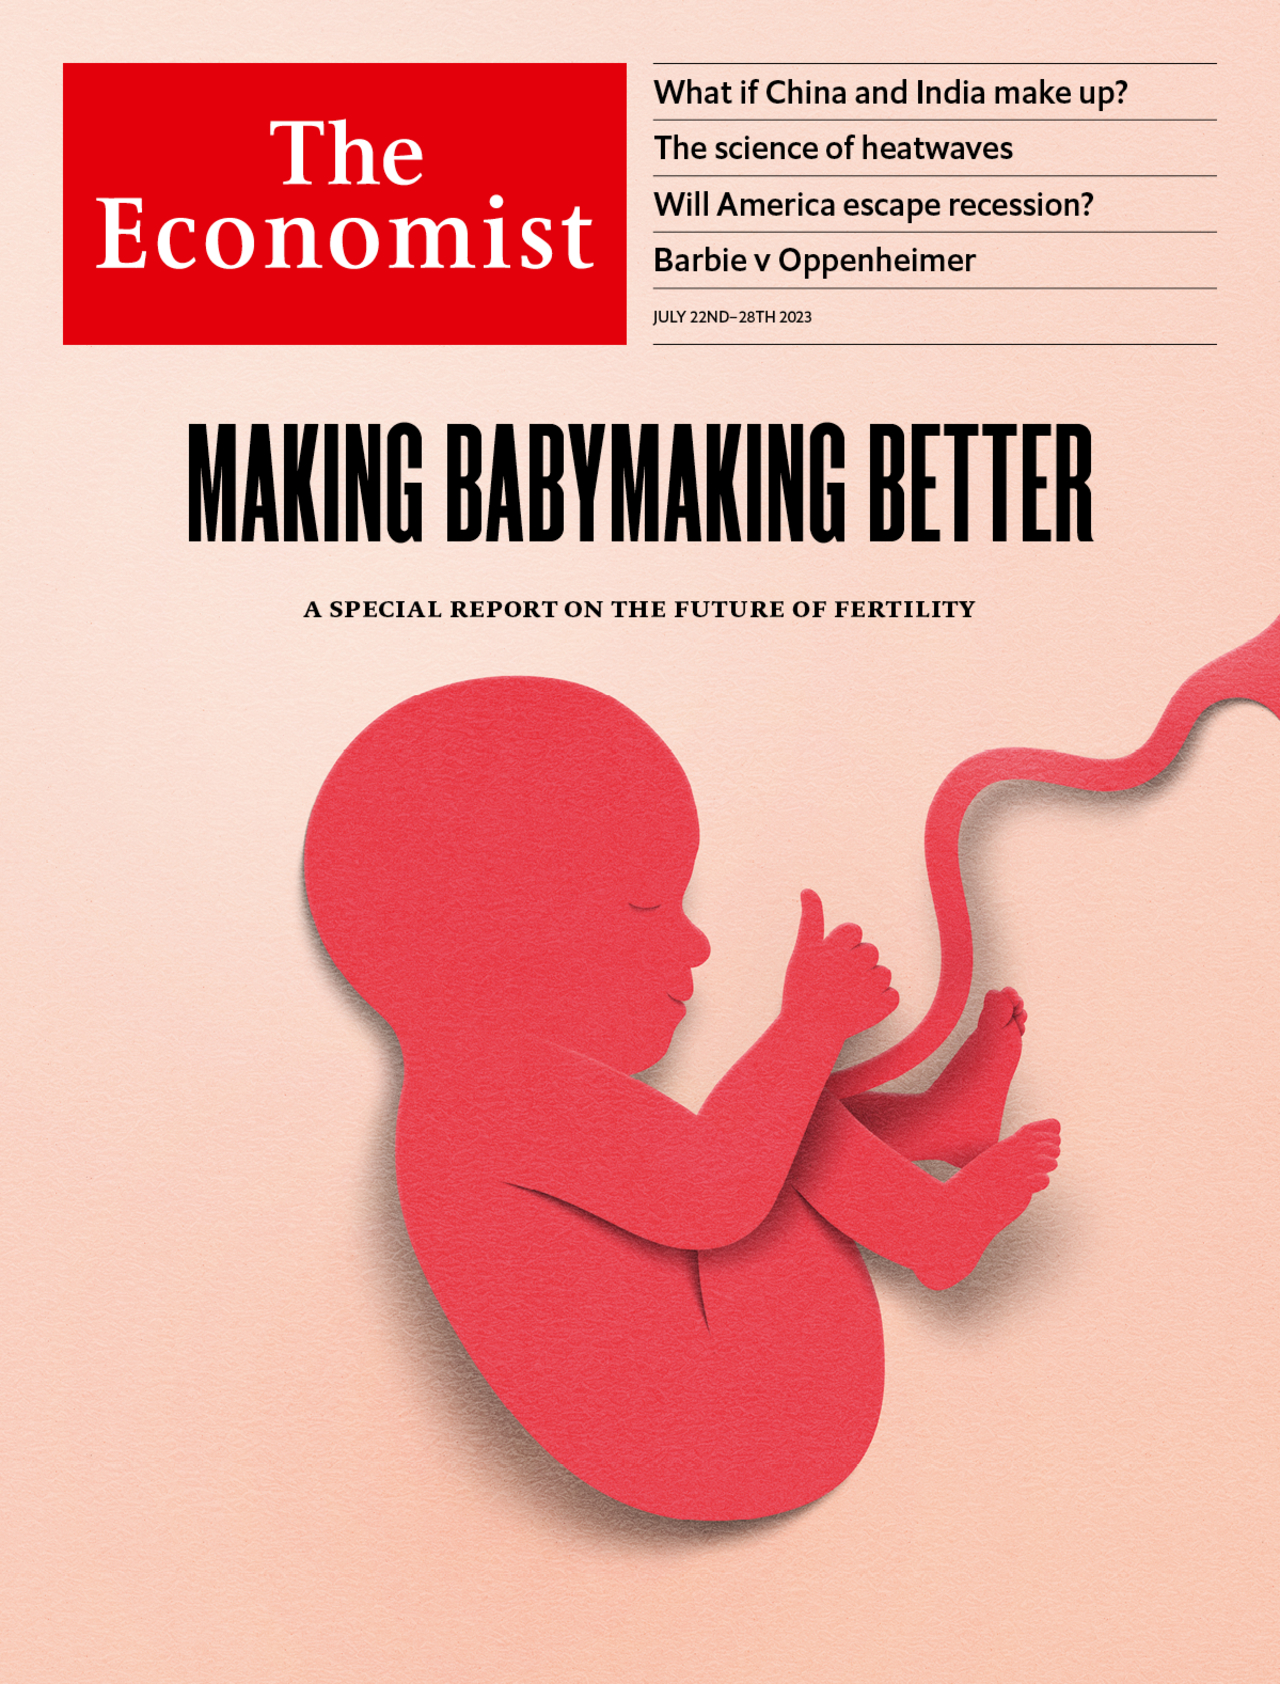 Making babymaking better: A special report on the future of fertility